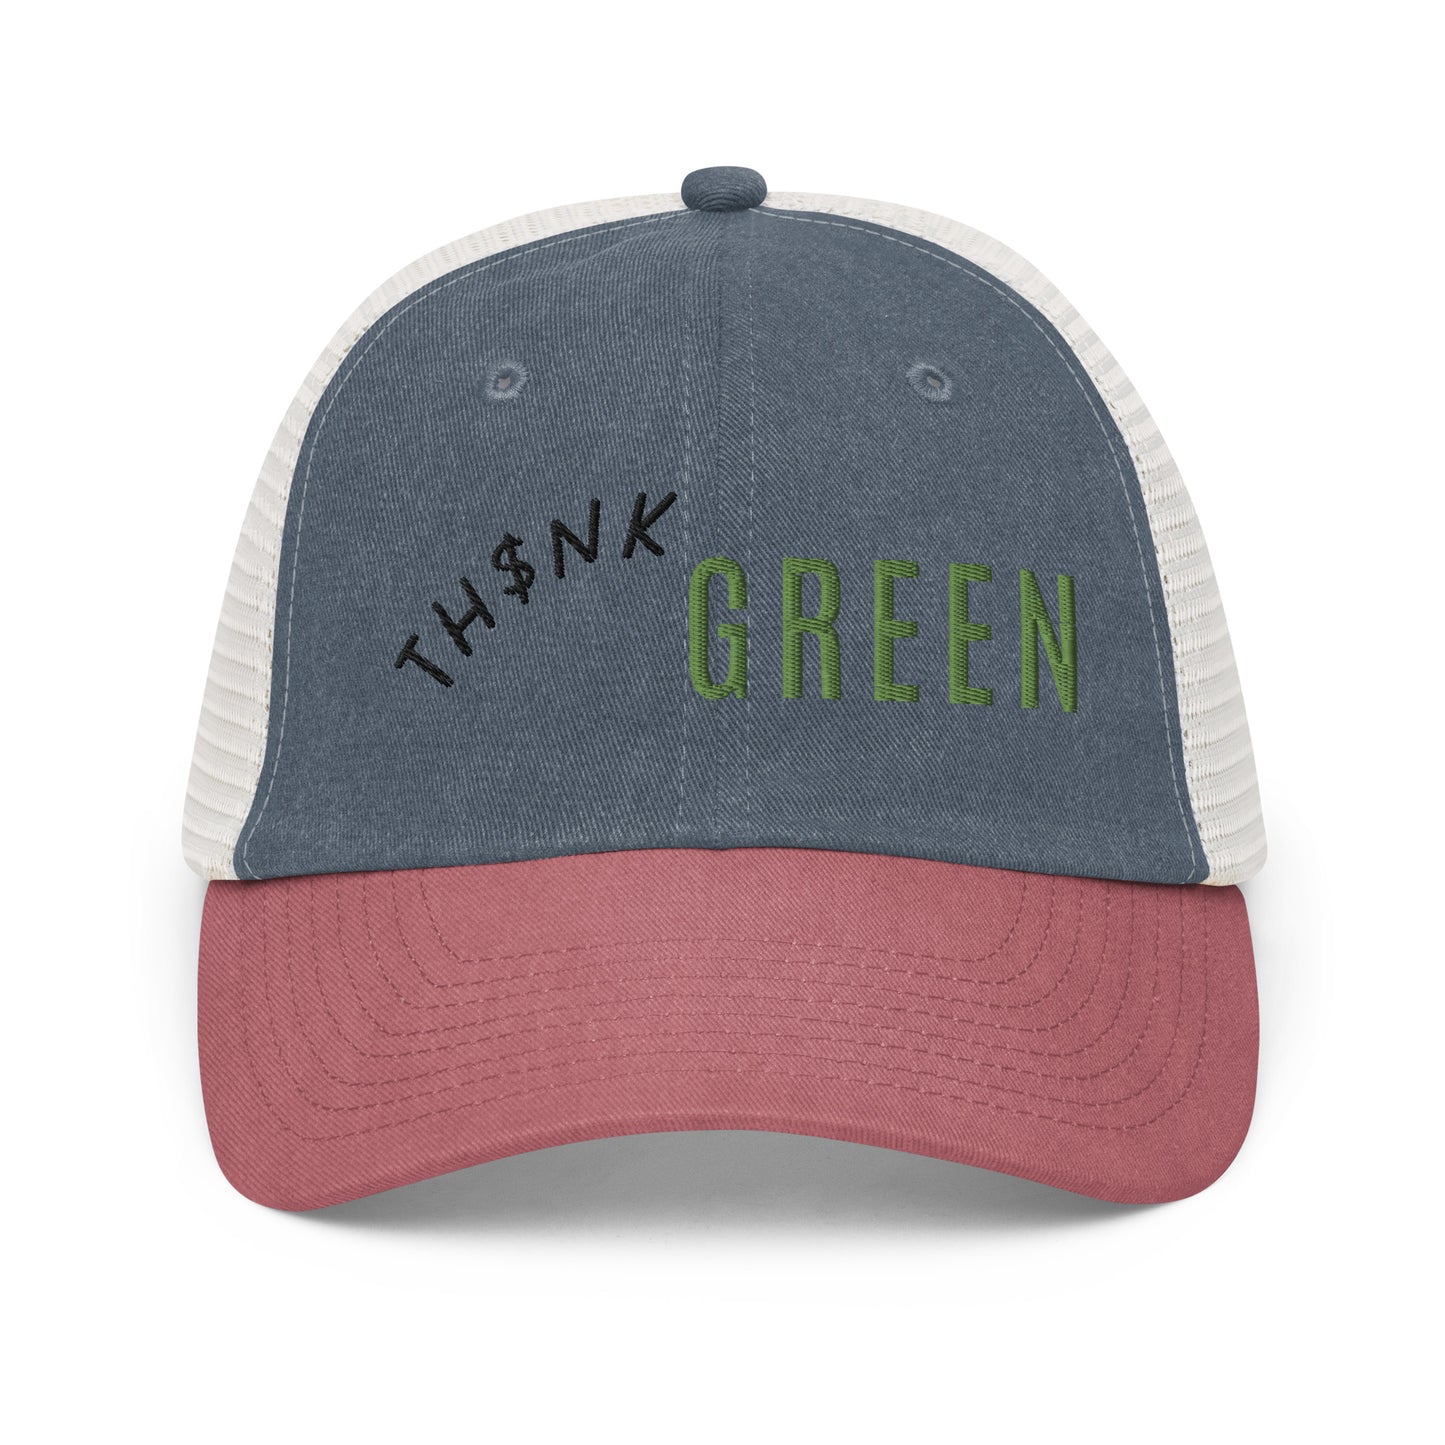 “Think Green” Pigment-dyed cap